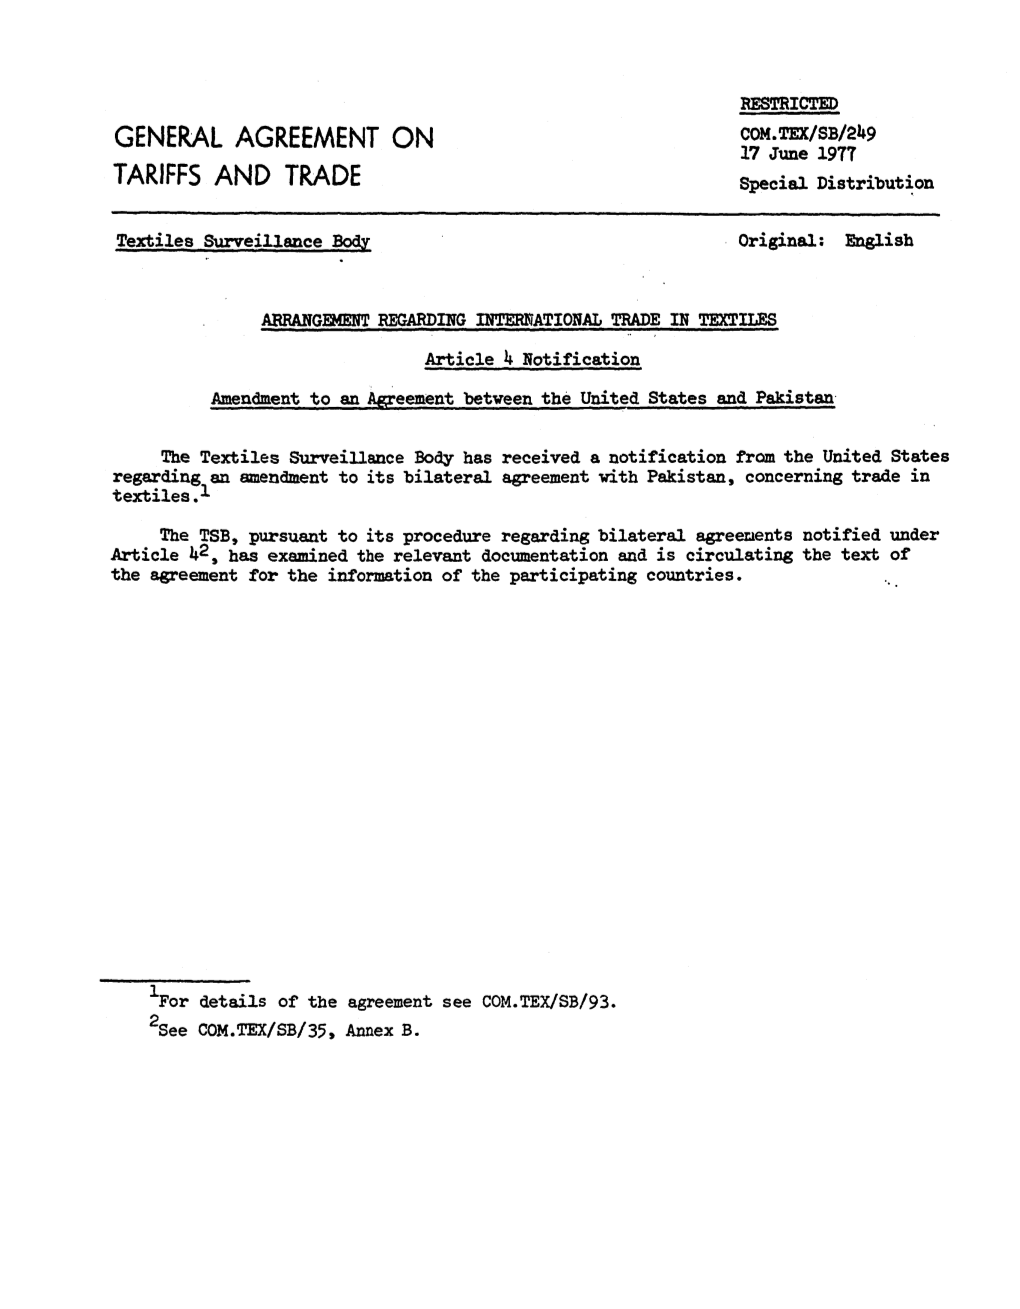 GENERAL AGREEMENT on 17 June 1977 TARIFFS and TRADE Special Distribution